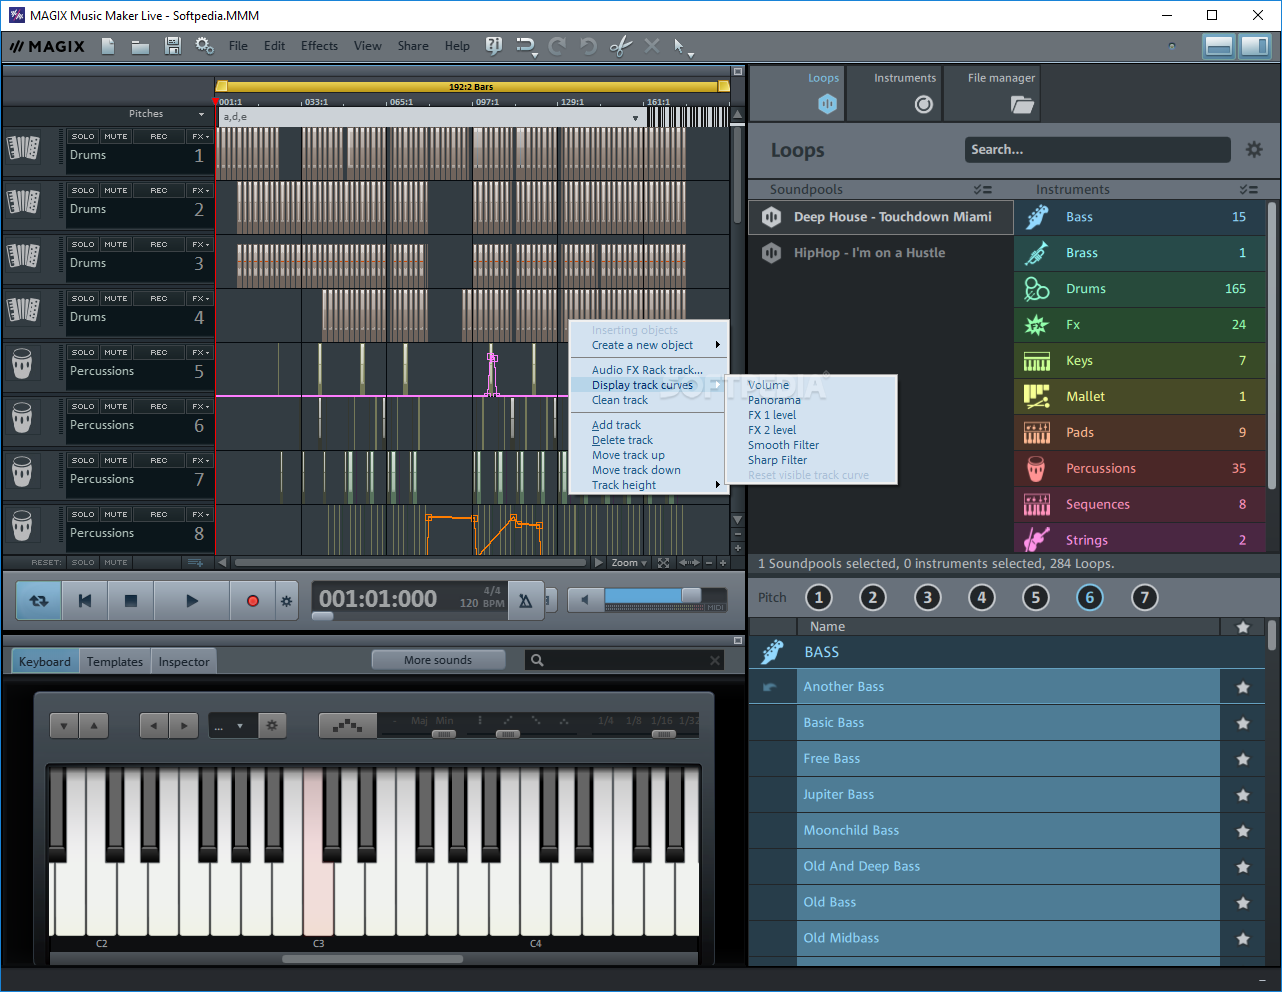 how to use vst plugins in magix music maker